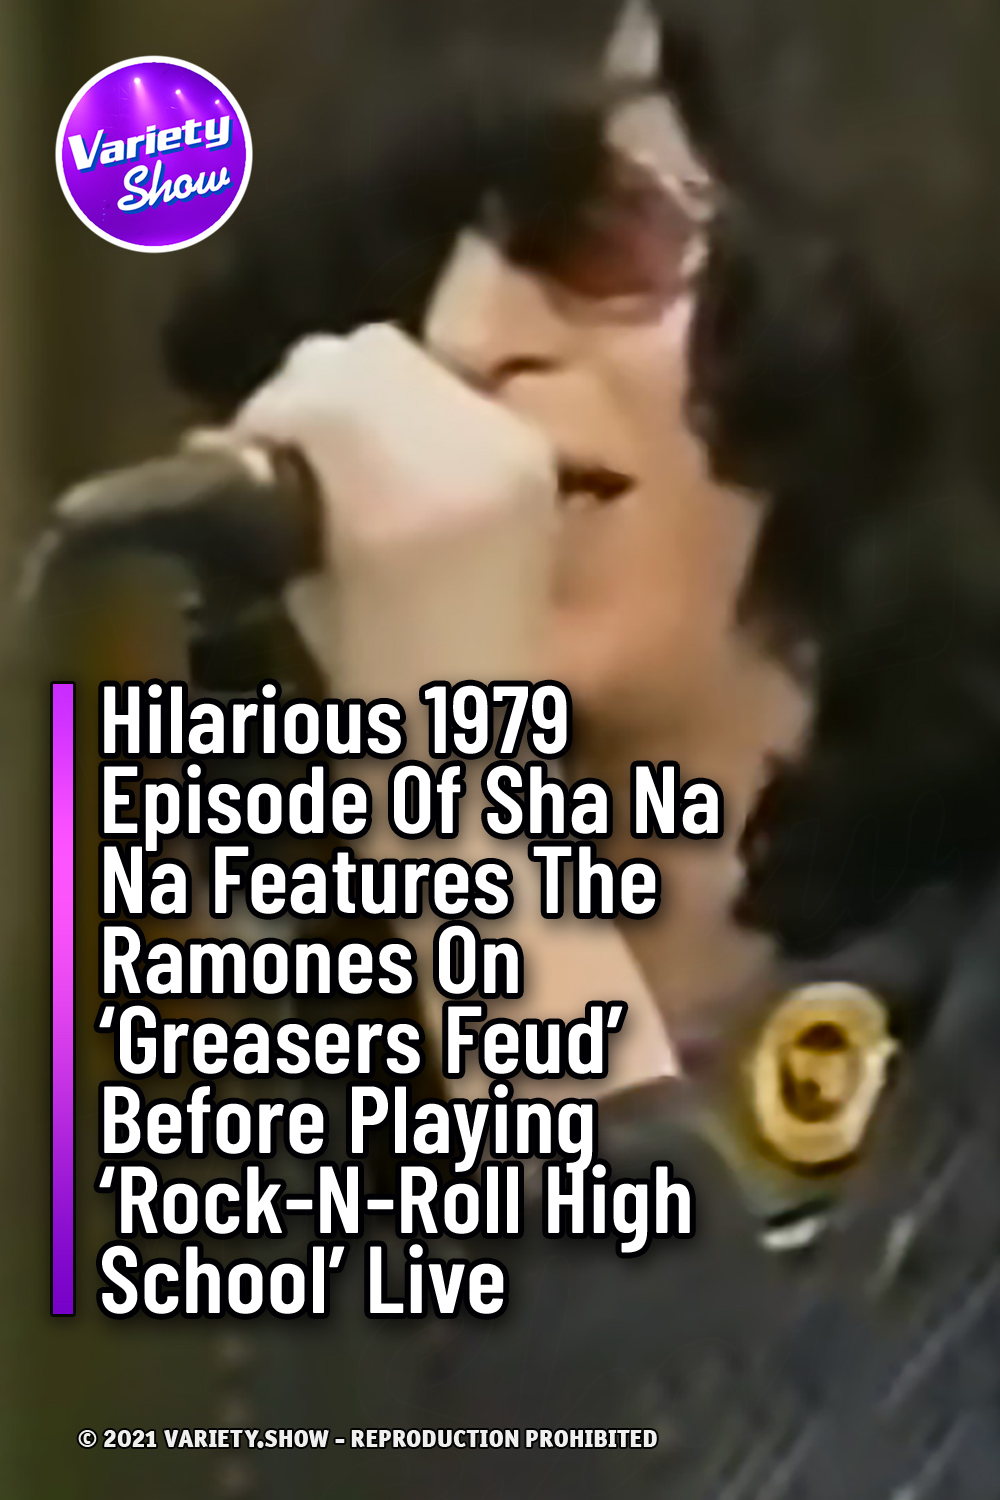 Hilarious 1979 Episode Of Sha Na Na Features The Ramones On ‘Greasers Feud’ Before Playing ‘Rock-N-Roll High School’ Live